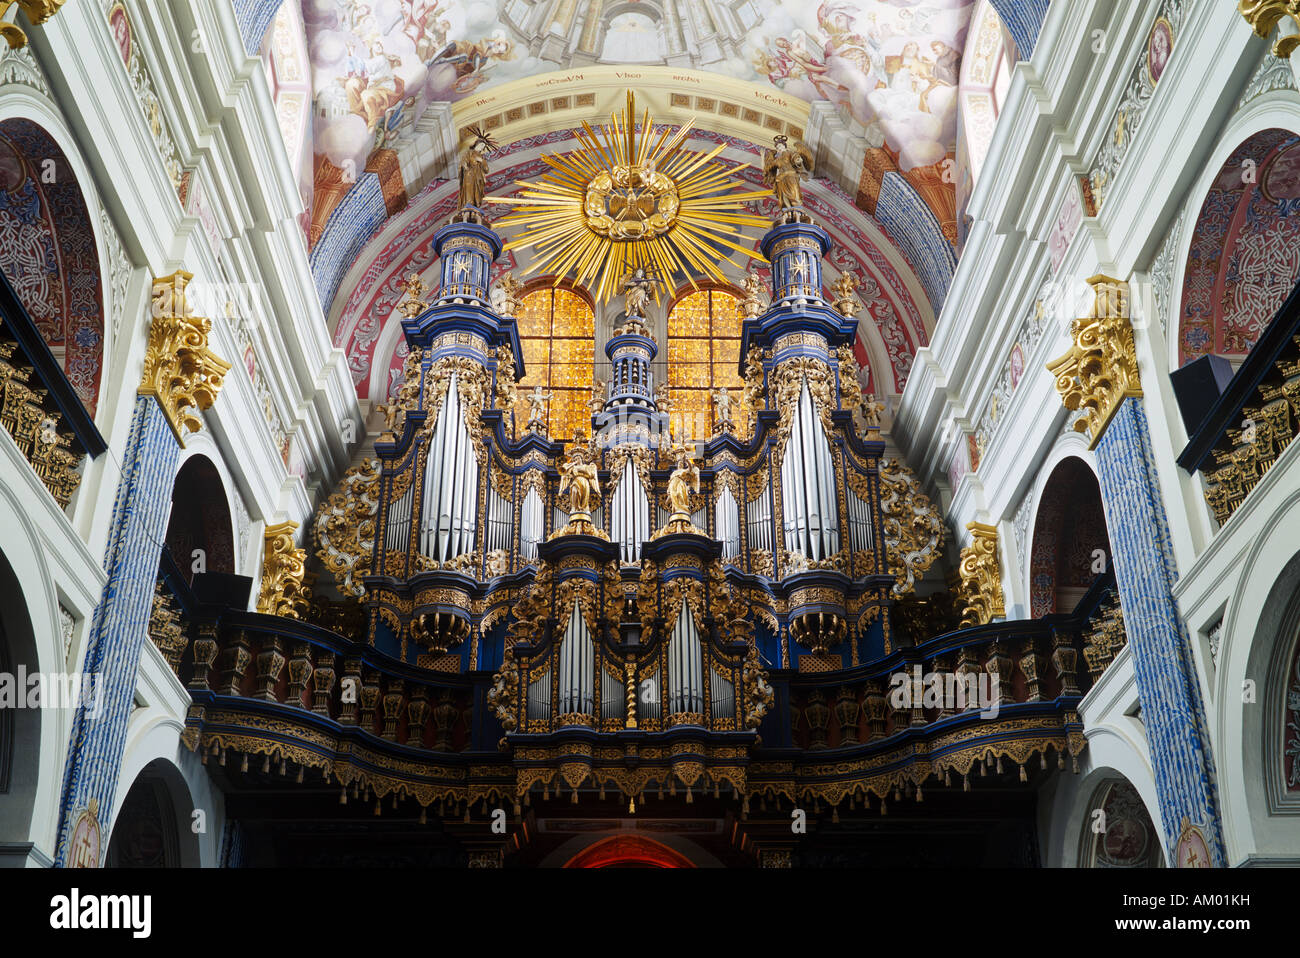 The baroque organ within the Pilgrimage Church Swieta Lipka (Holy Lime) is equiped with lots of mobile figures. Stock Photo